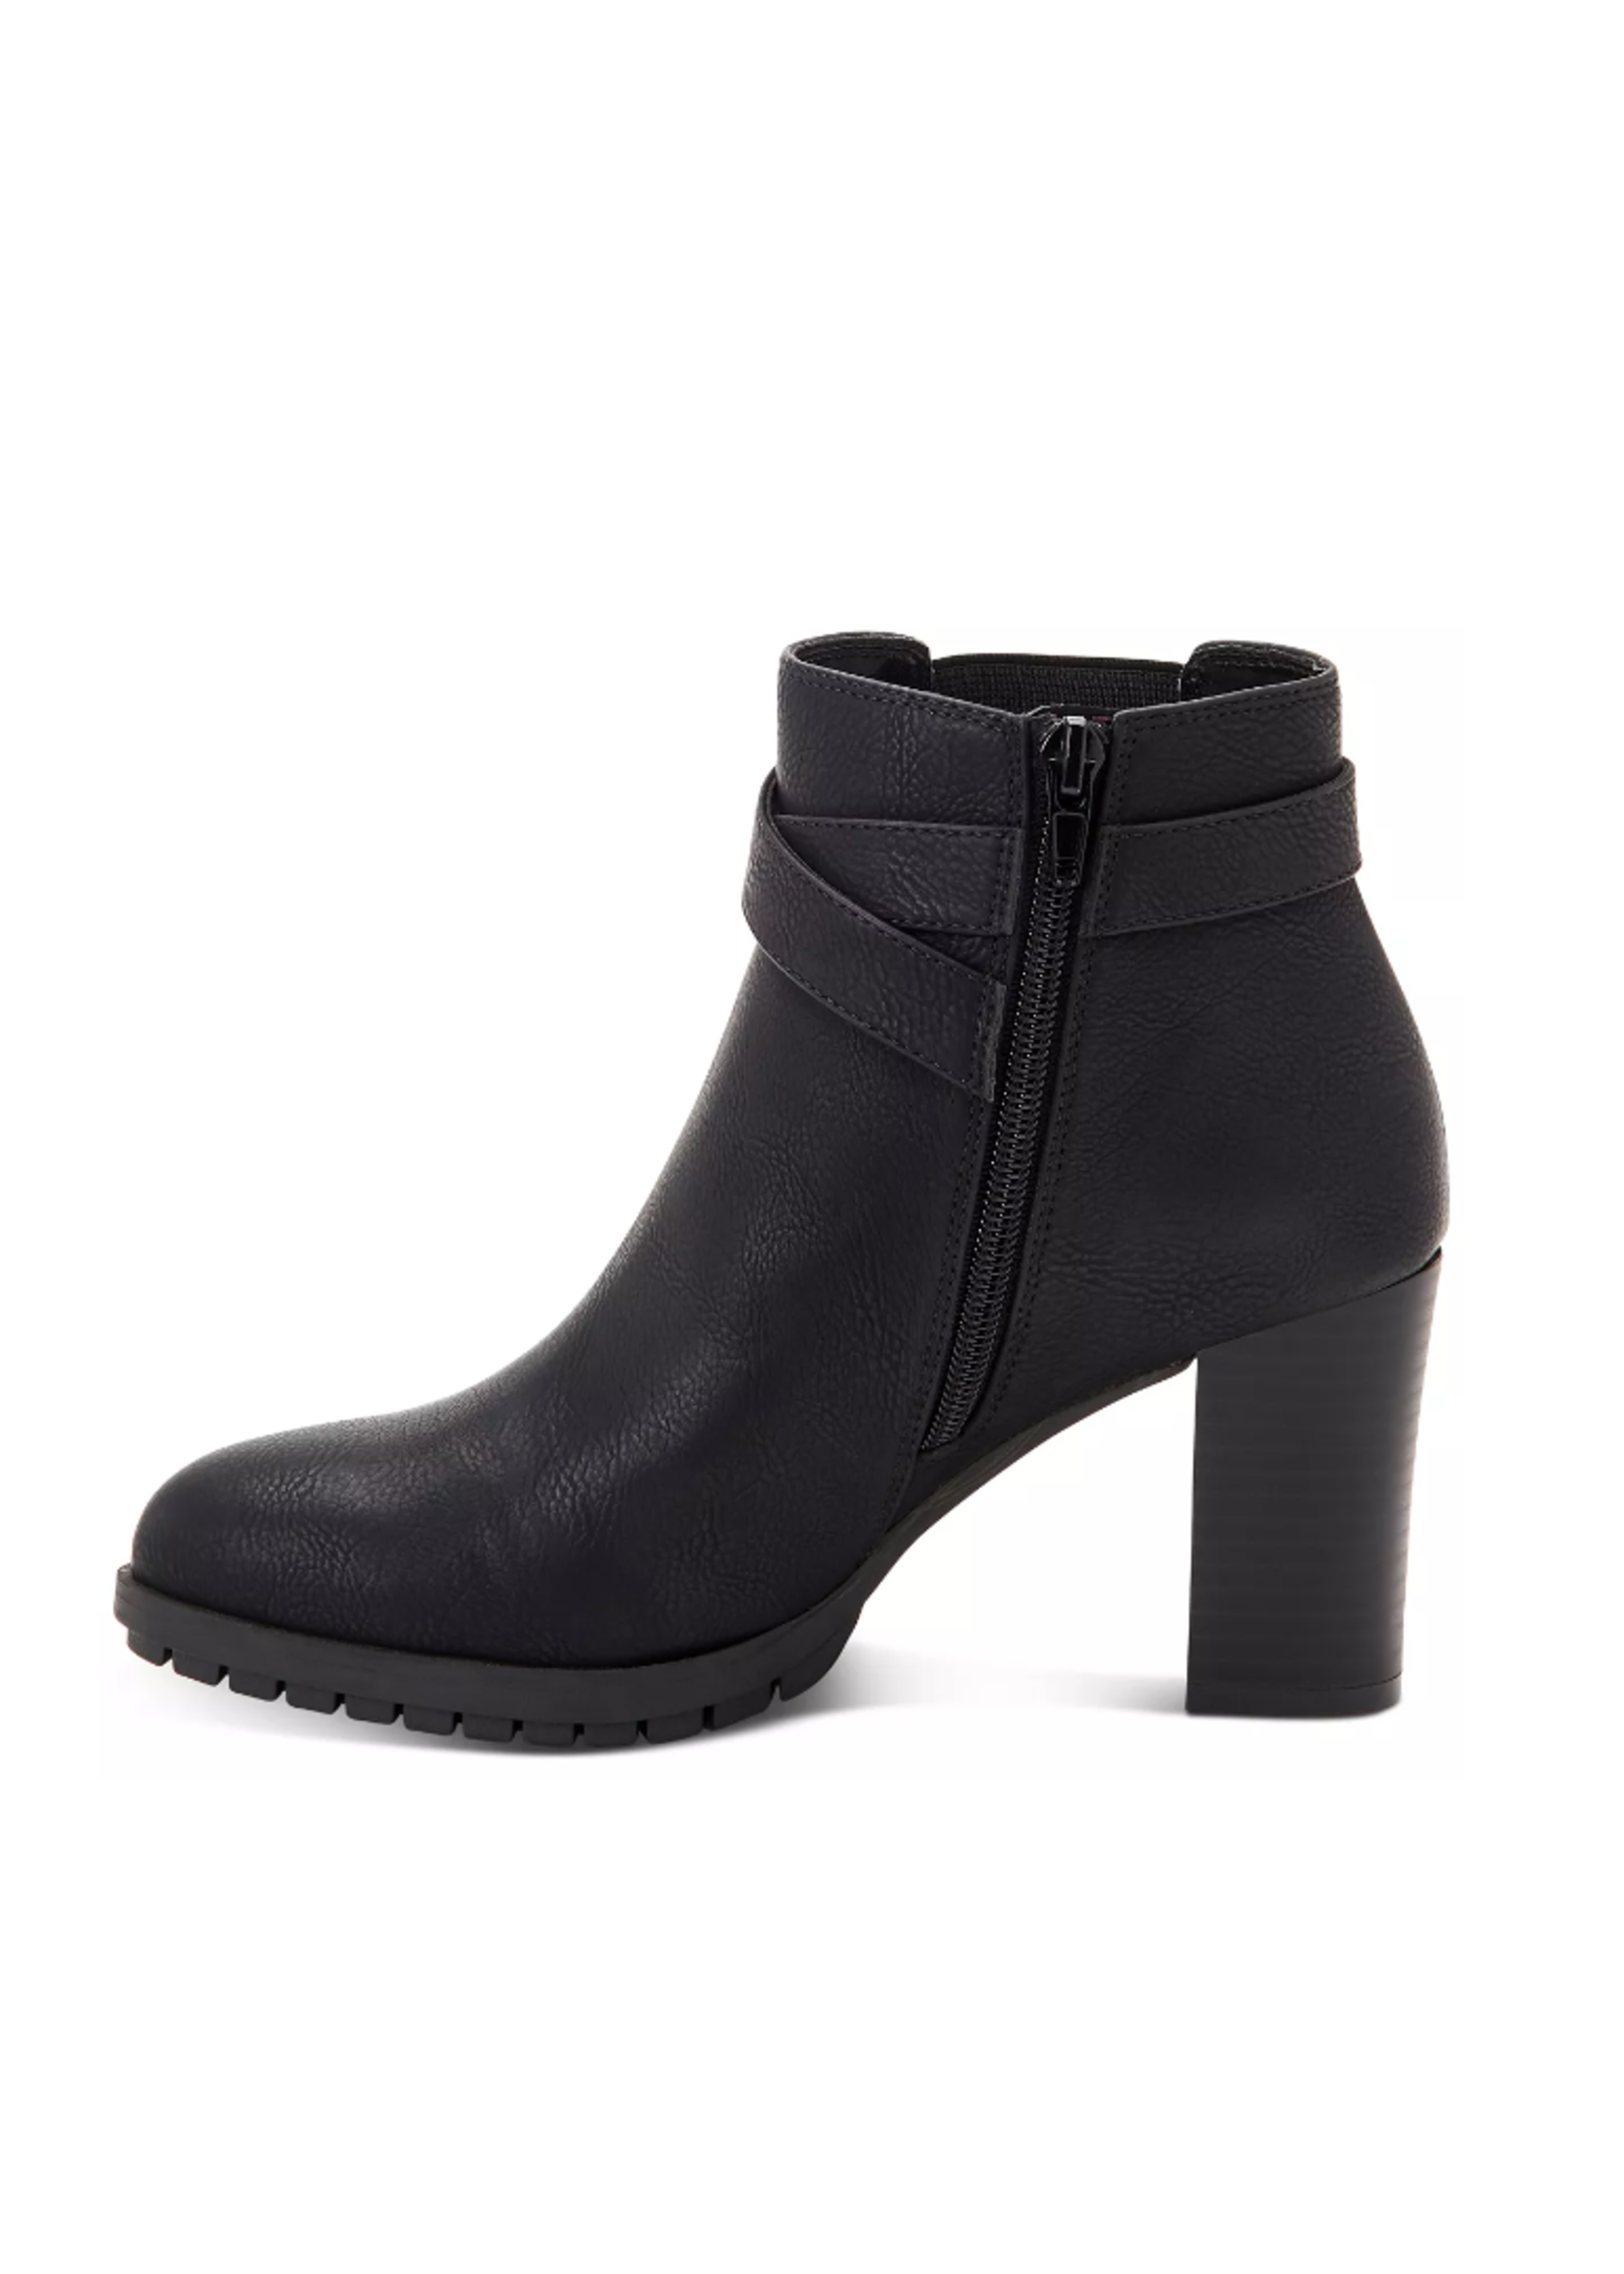 style&co Style & Co Women's Black Buckle Boots